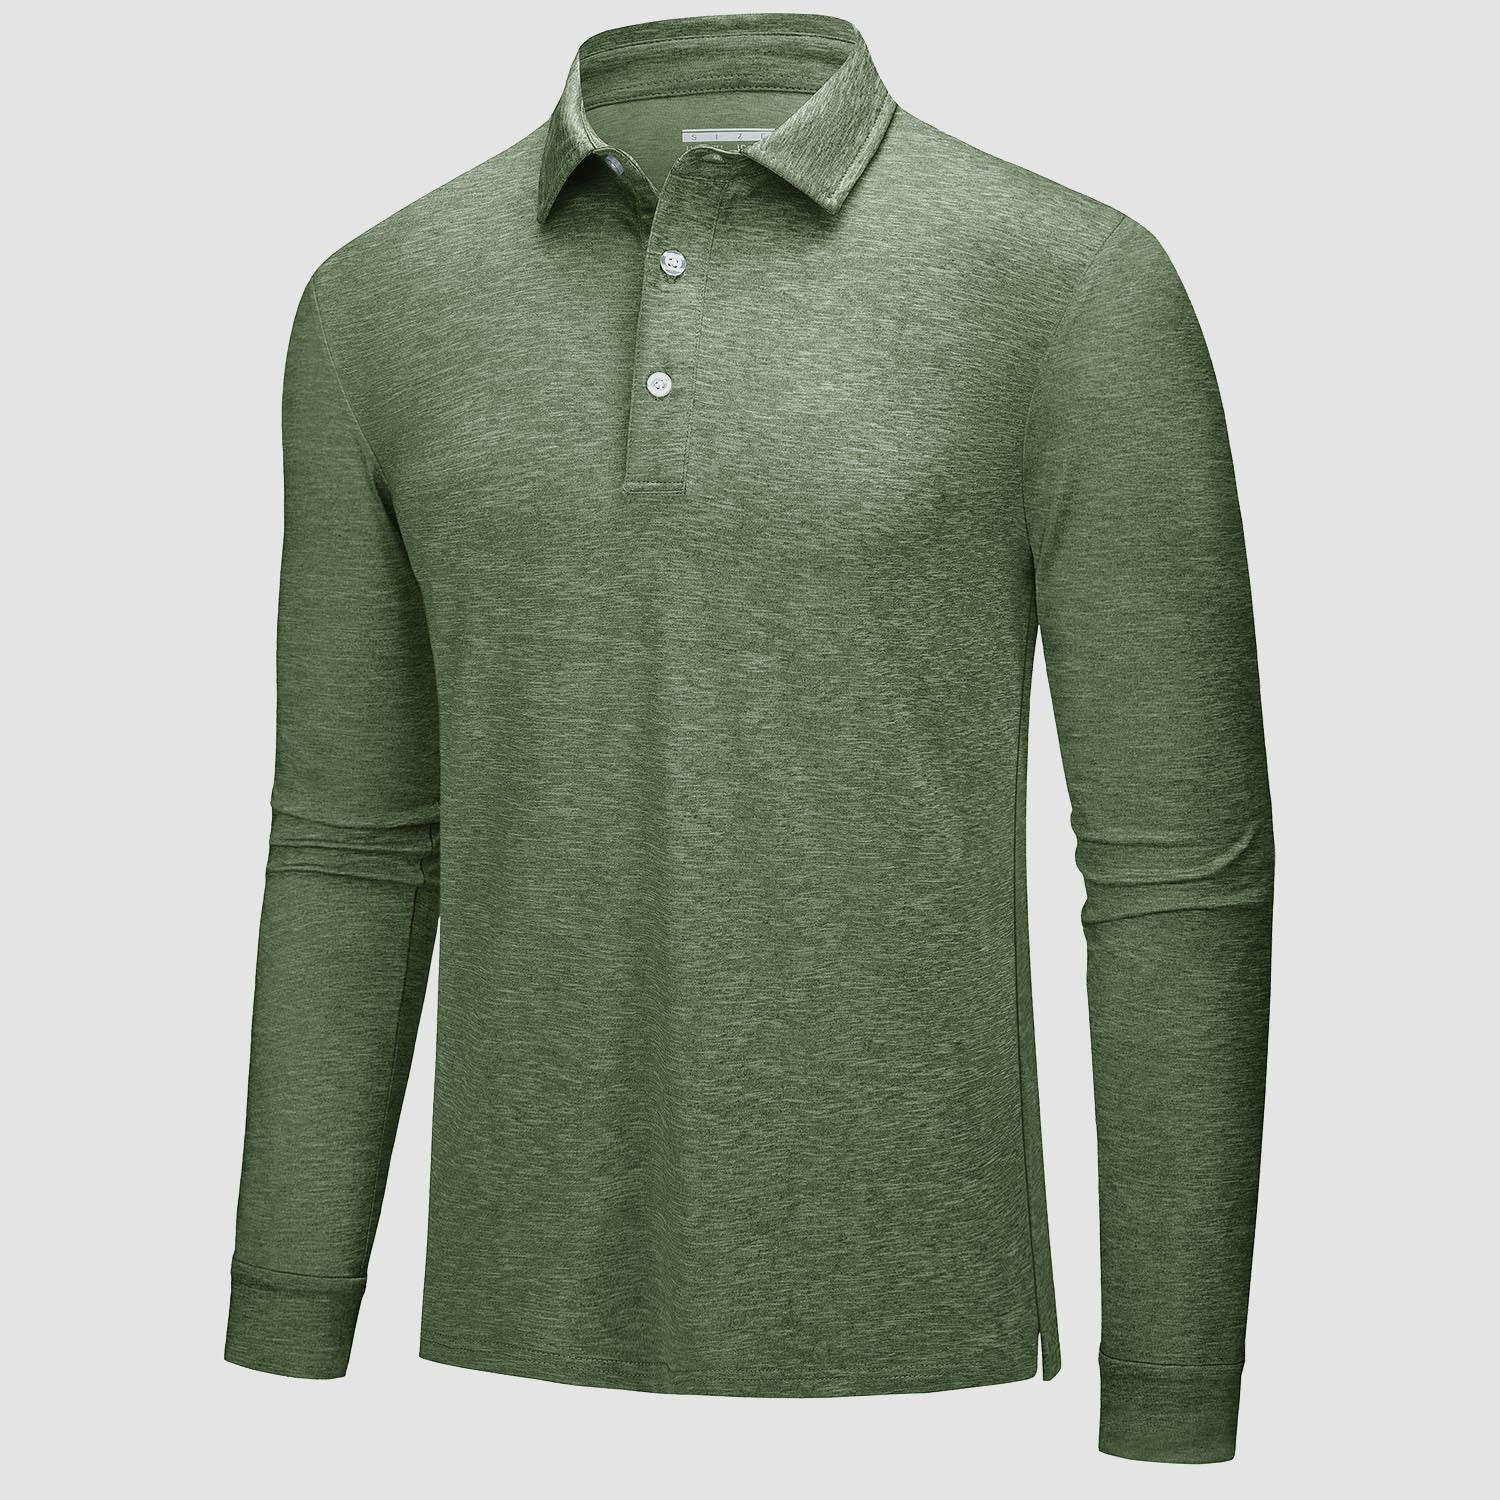 Men's Long Sleeve Polo Shirts 3 Buttons Collared Shirt Quick Dry Performance Golf Polo Tee Shirt